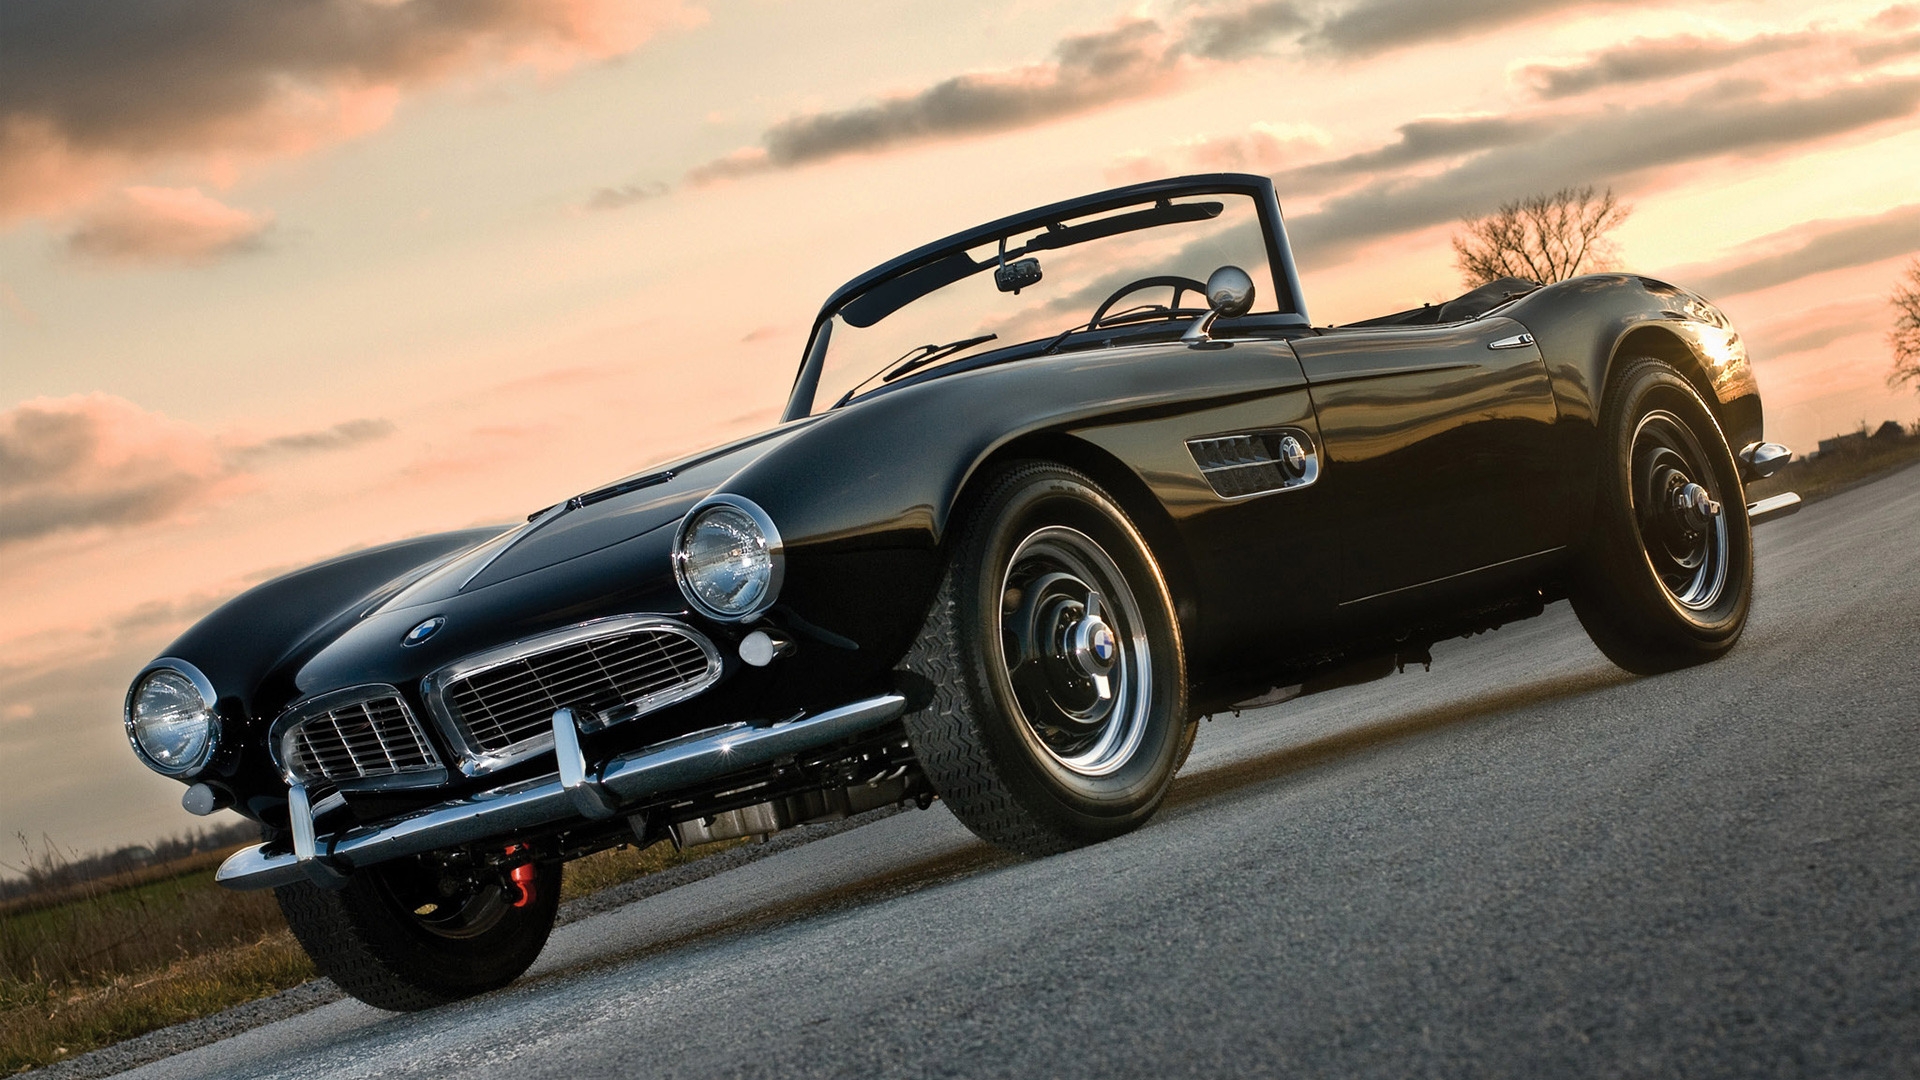 Amazing BMW 507 from 1957 for 1920 x 1080 HDTV 1080p resolution